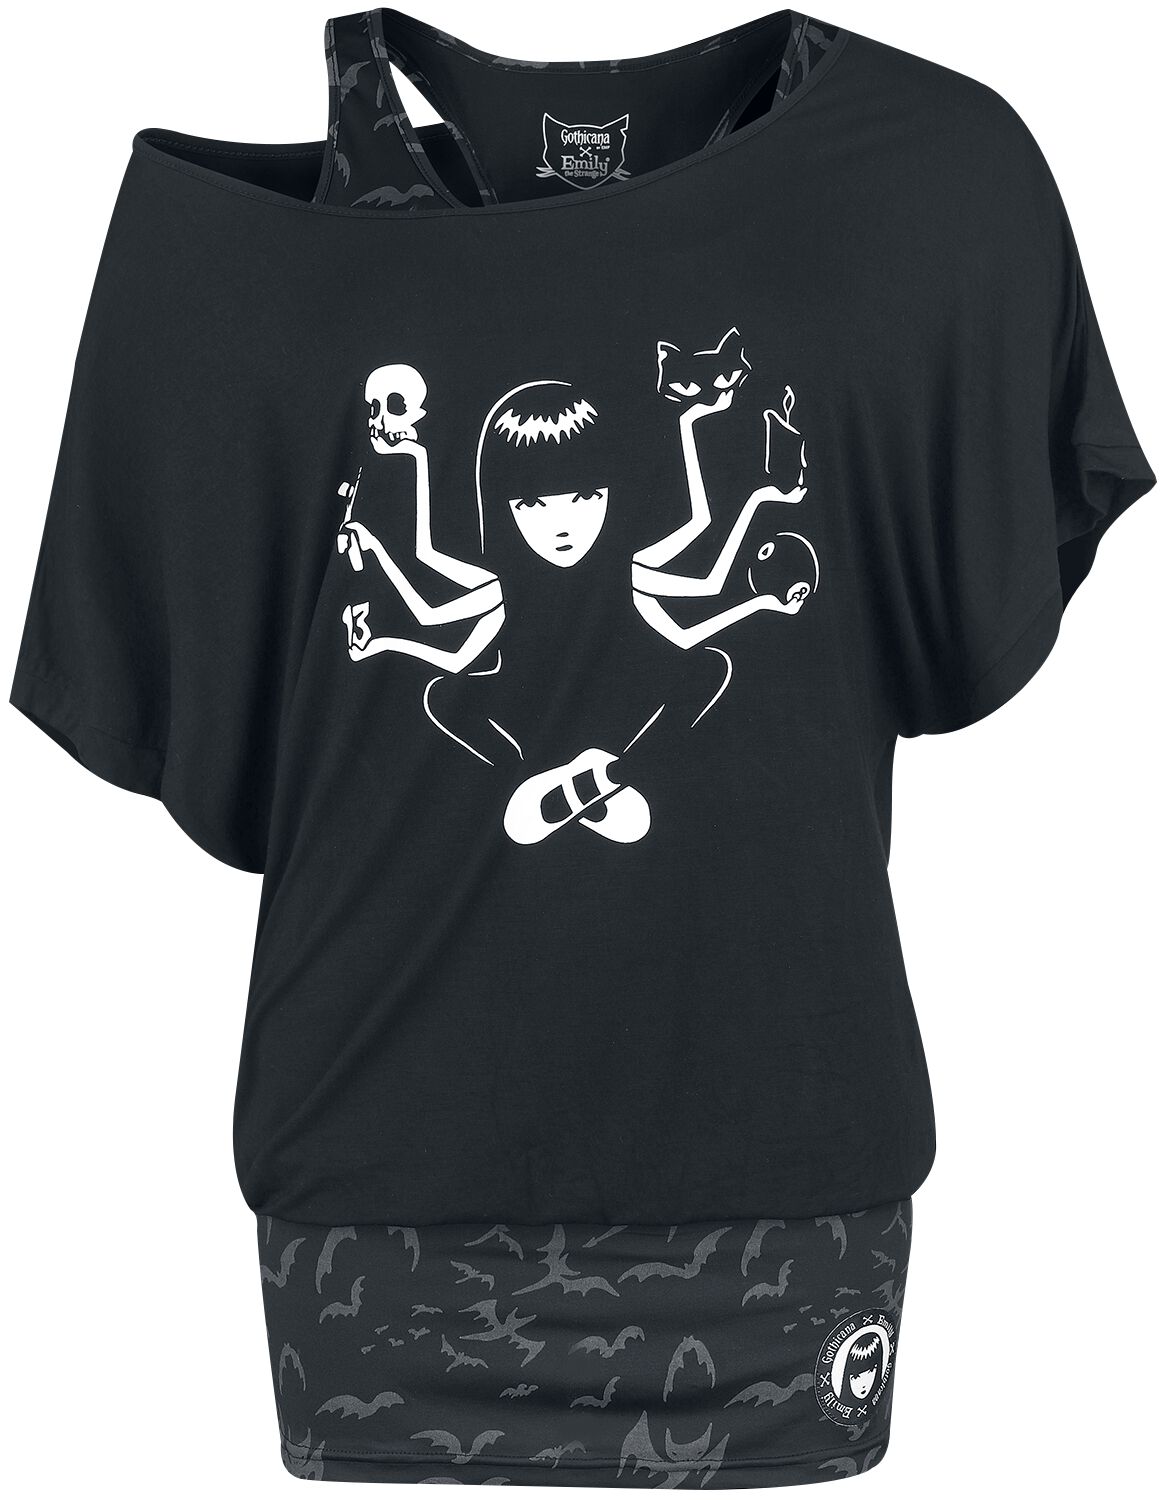 Image of T-Shirt Gothic di Gothicana by EMP - Gothicana X Emily the Strange 2-in-1 t-shirt and top - S a M - Donna - nero